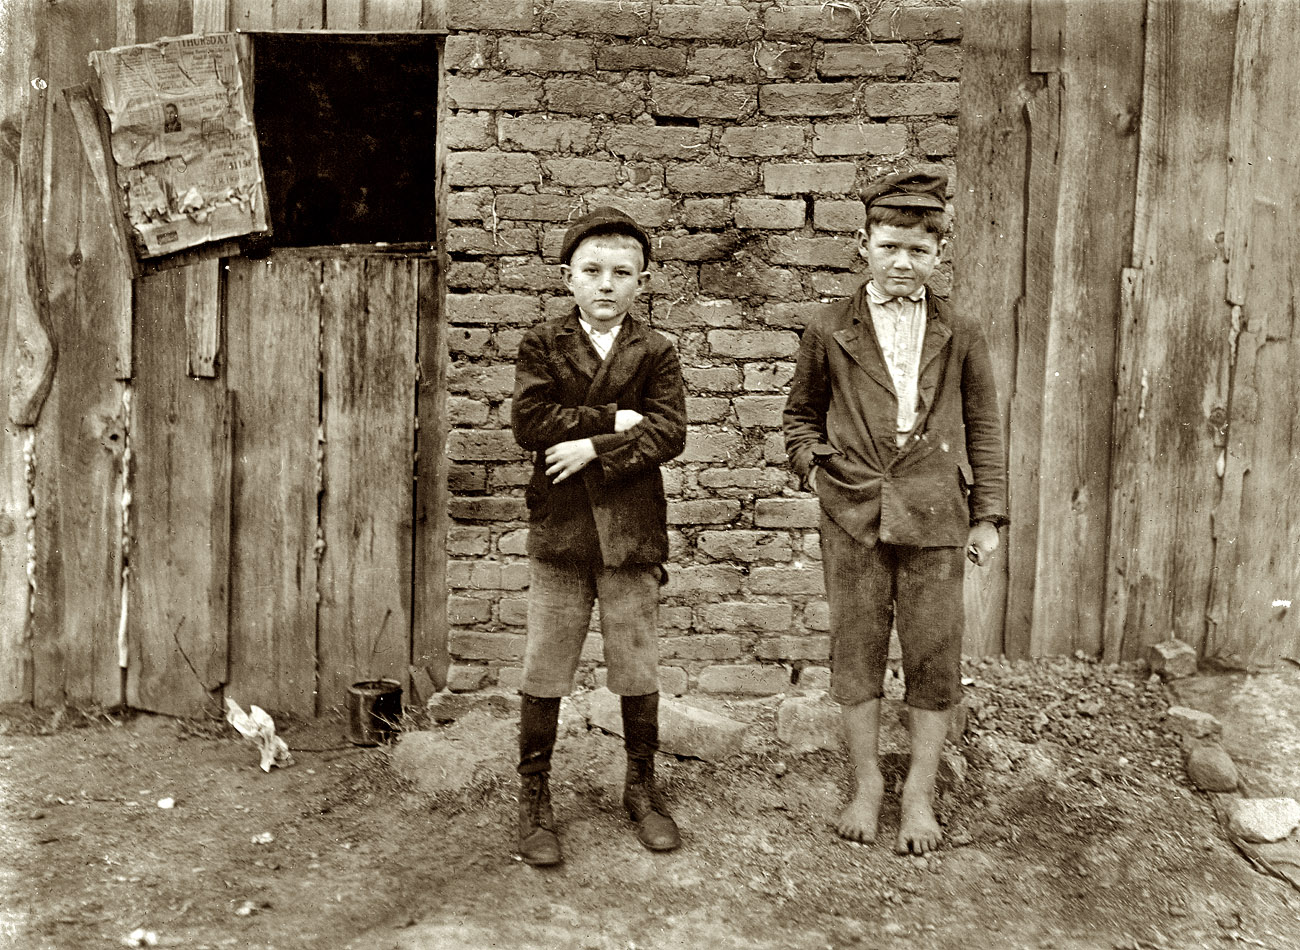 November 1908. Chester, South Carolina. "Eureka Cotton Mills. John Madison, 11 years old; 53 inches high. Beginning to sweep. Floyd Root, 10 years old. 50 inches high. Helps cousin spin every day after school. Witness: S.R. Hine." Photograph and caption by Lewis Wickes Hine. View full size.